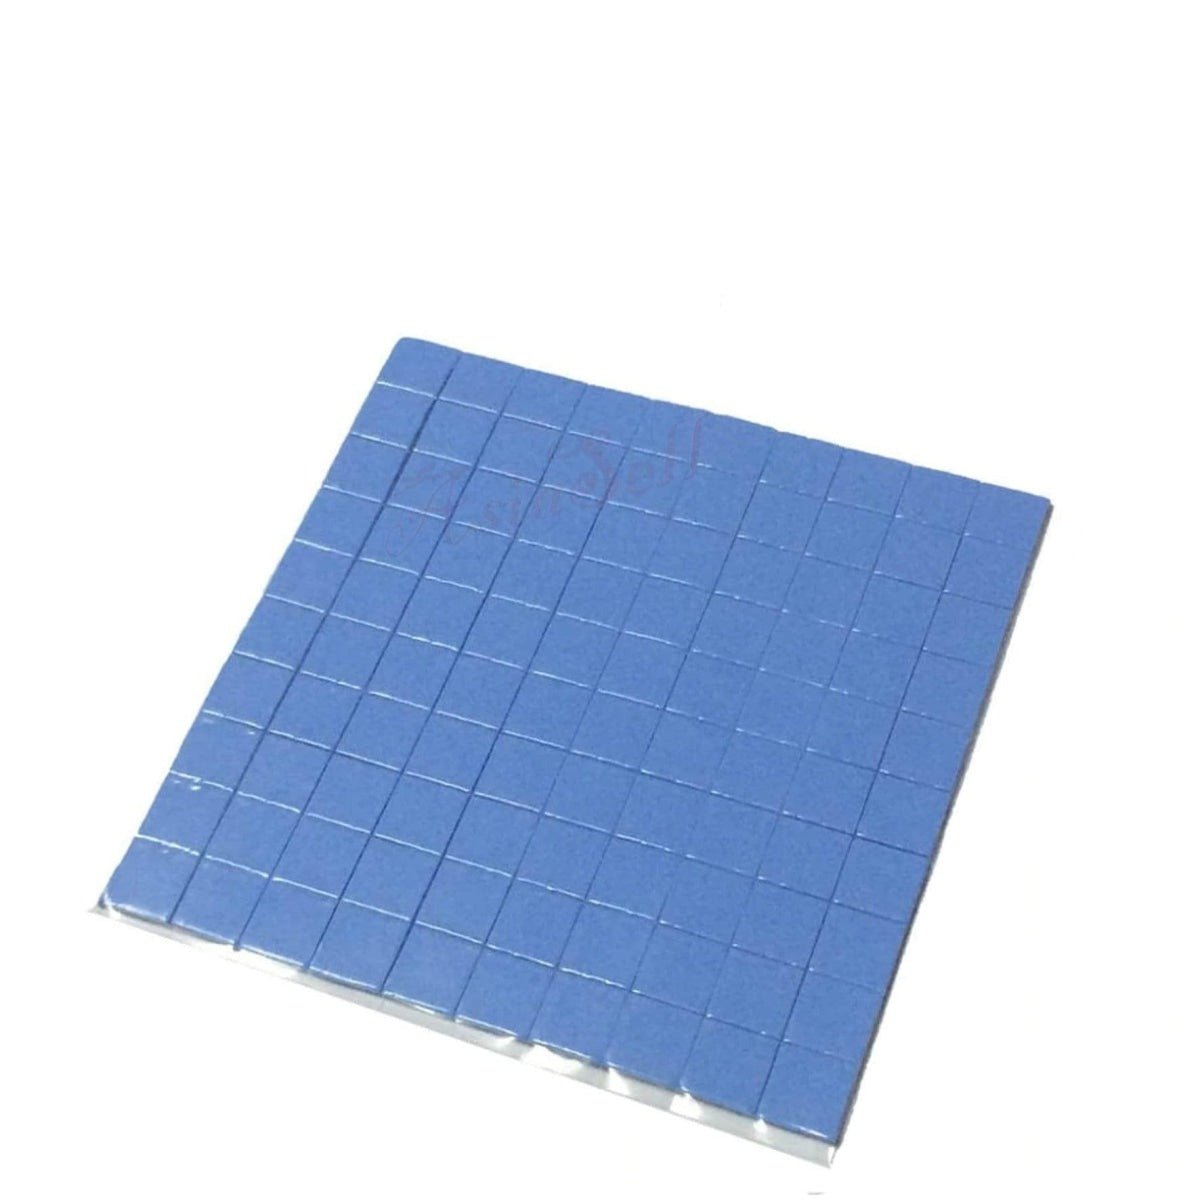 100x100x1mm/2mm CPU Thermal Pad Heatsink Cooling Conductive Silicone Pads Heat Sink - 1mm pre-cut - - Asia Sell